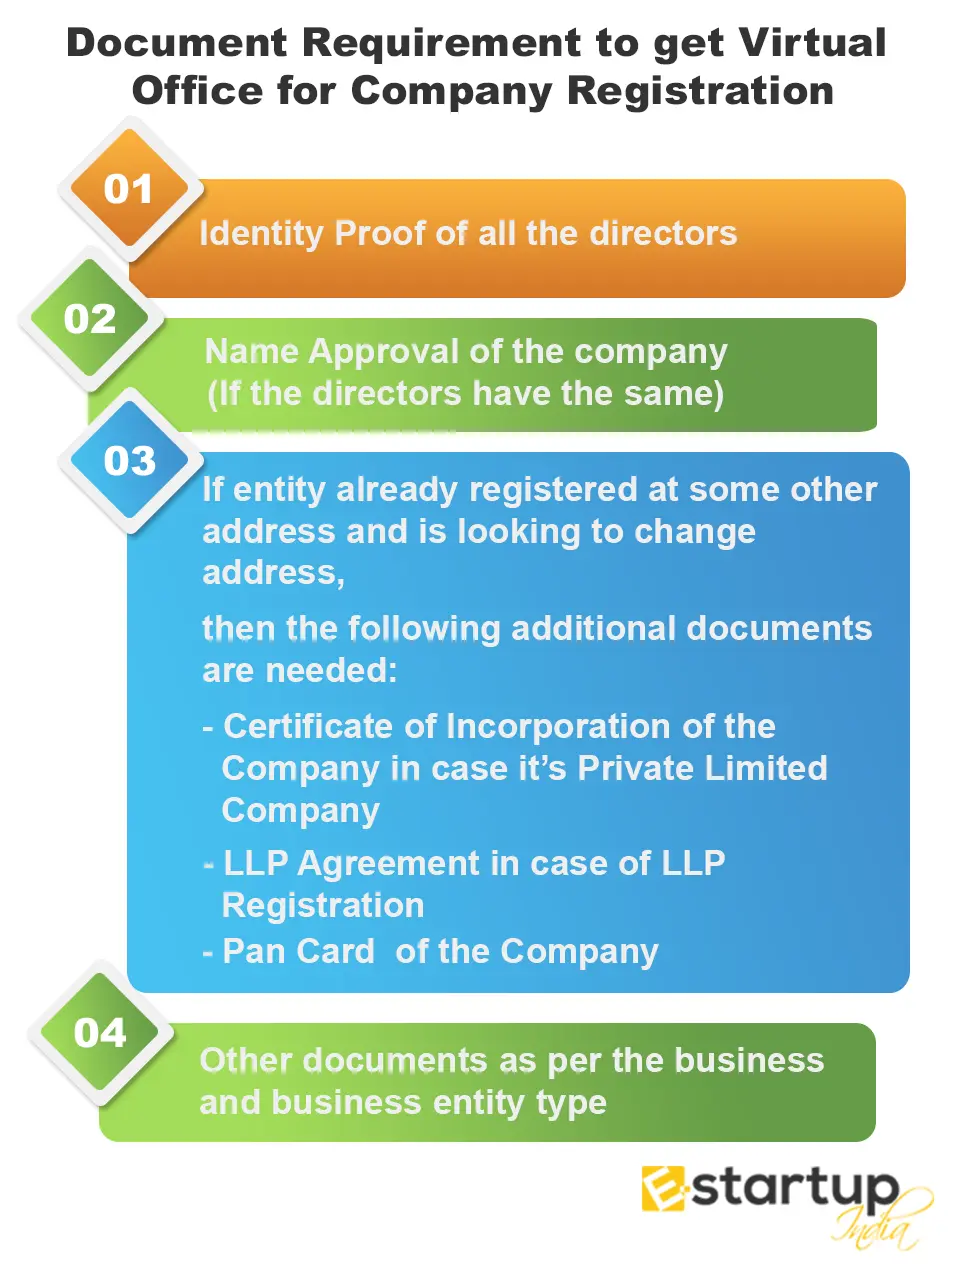 Document Requirement to get Virtual Office for Company Registration